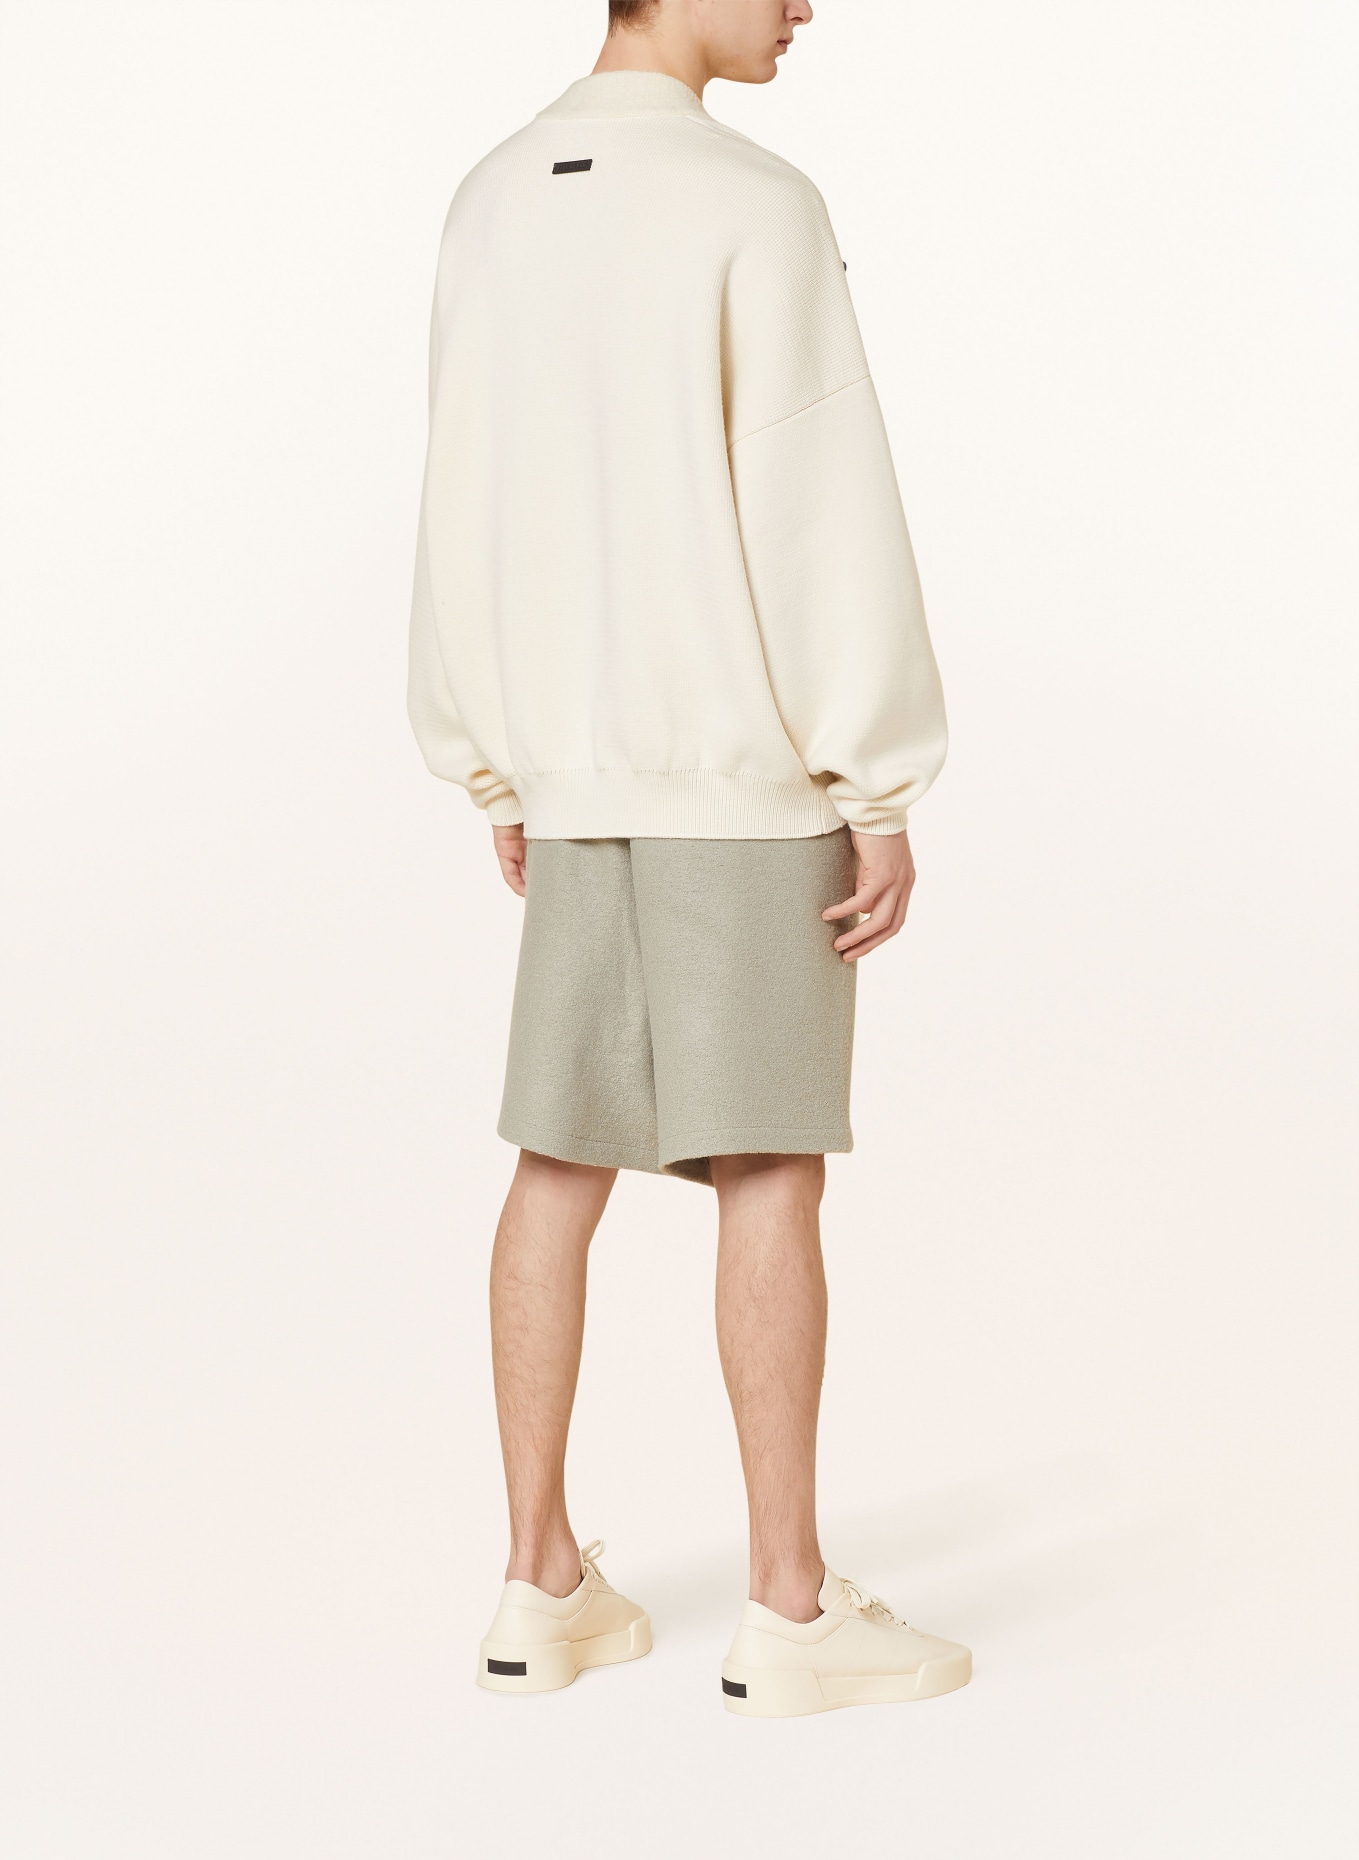 FEAR OF GOD Shorts with tuxedo stripes, Color: LIGHT GREEN/ CREAM/ BLACK (Image 3)